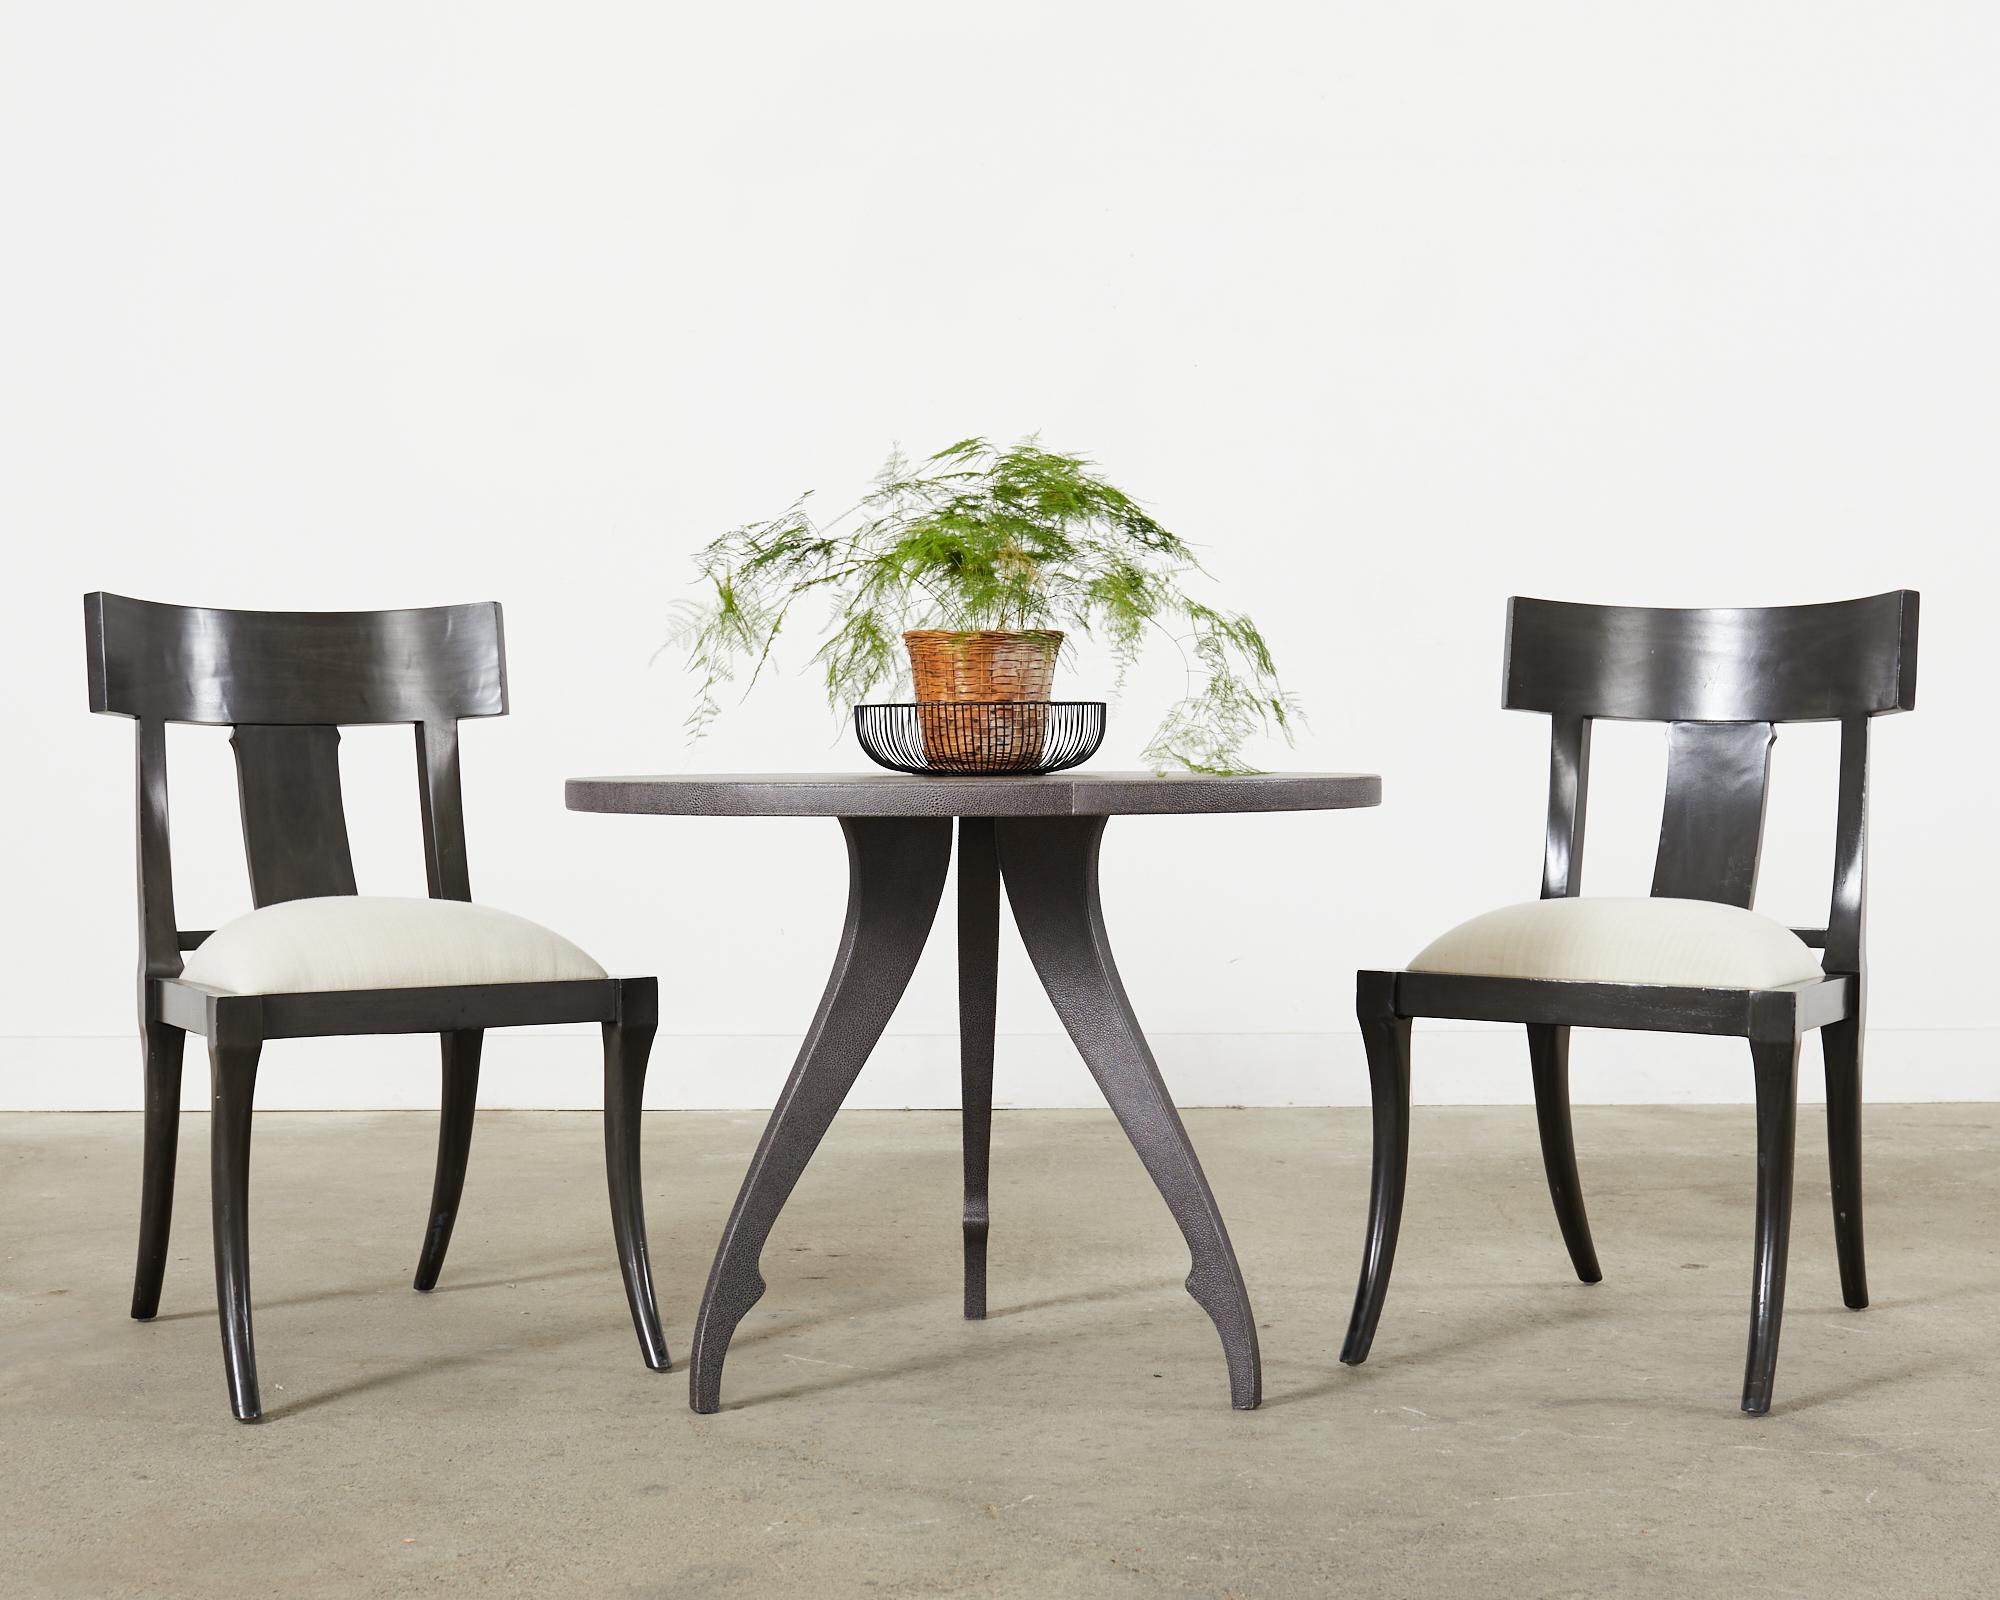 Dramatic set of six klismos dining chairs featuring a a hardwood frame with an ebonized lacquer finish in a dark grey tone. The frames have a classic tablet back and saber style legs in the Greco-Roman neoclassical style. The generous seat has a